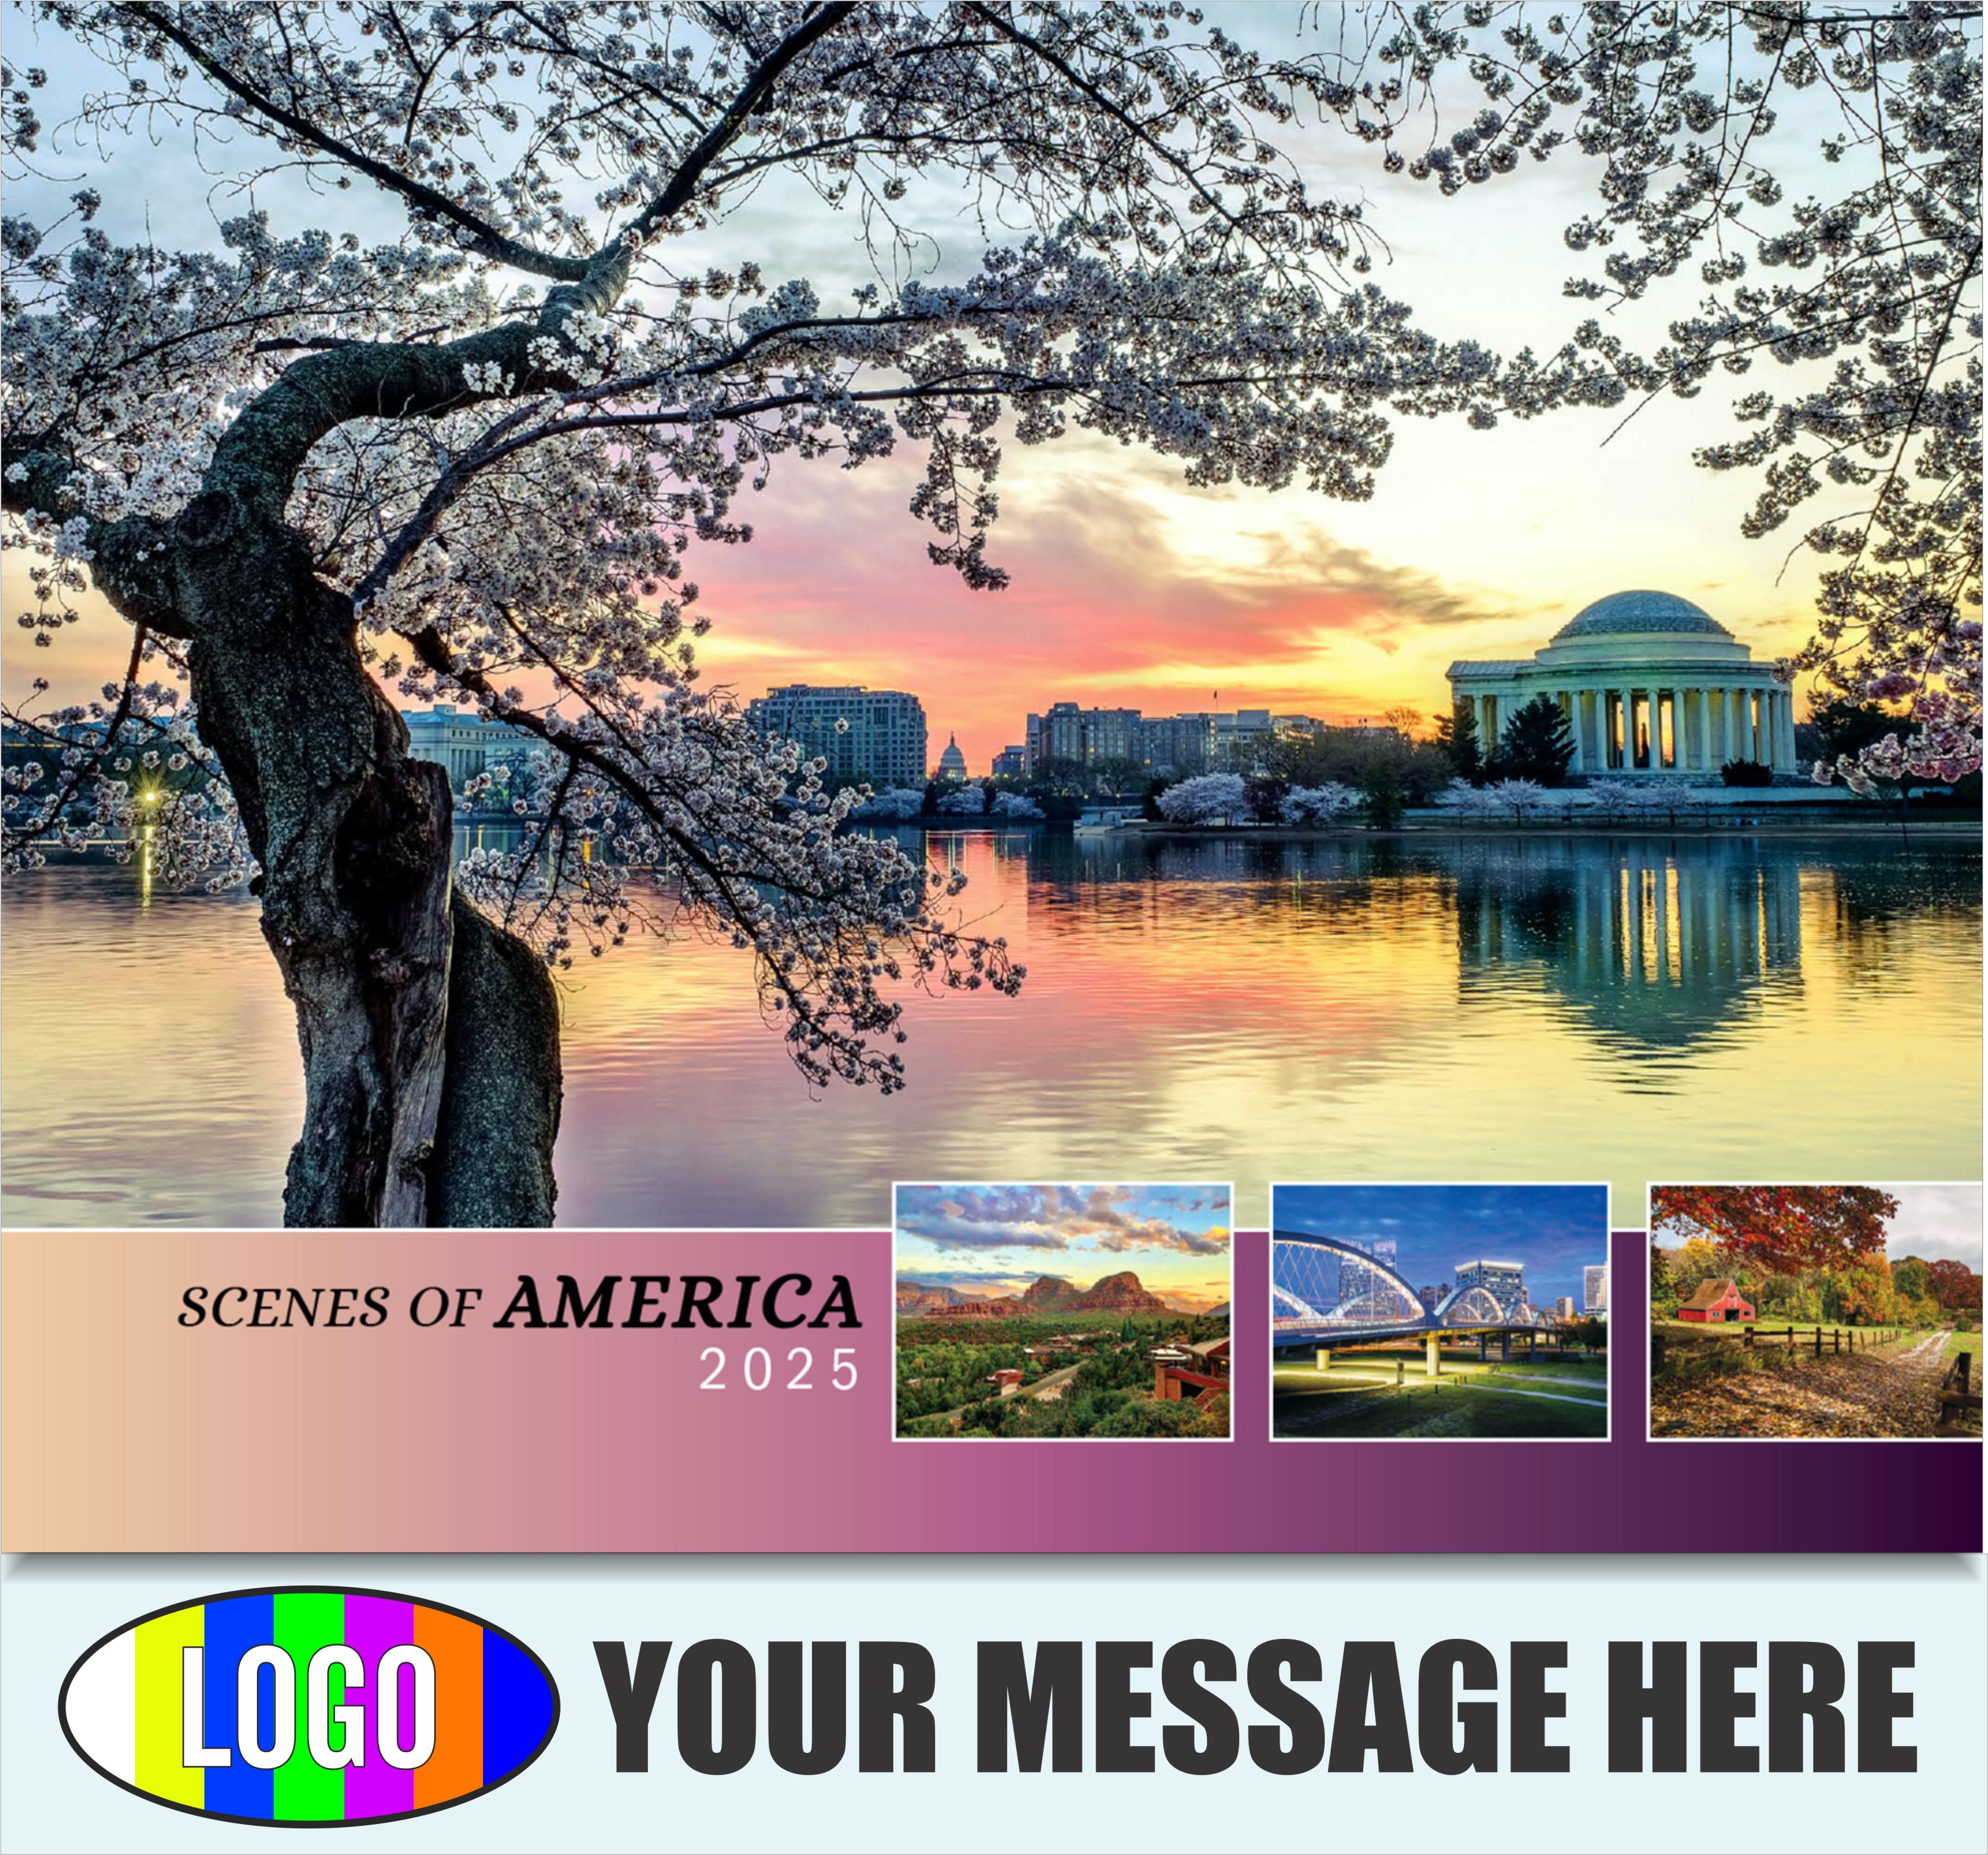 Scenes of America 2025 Business Advertising Wall Calendar - cover